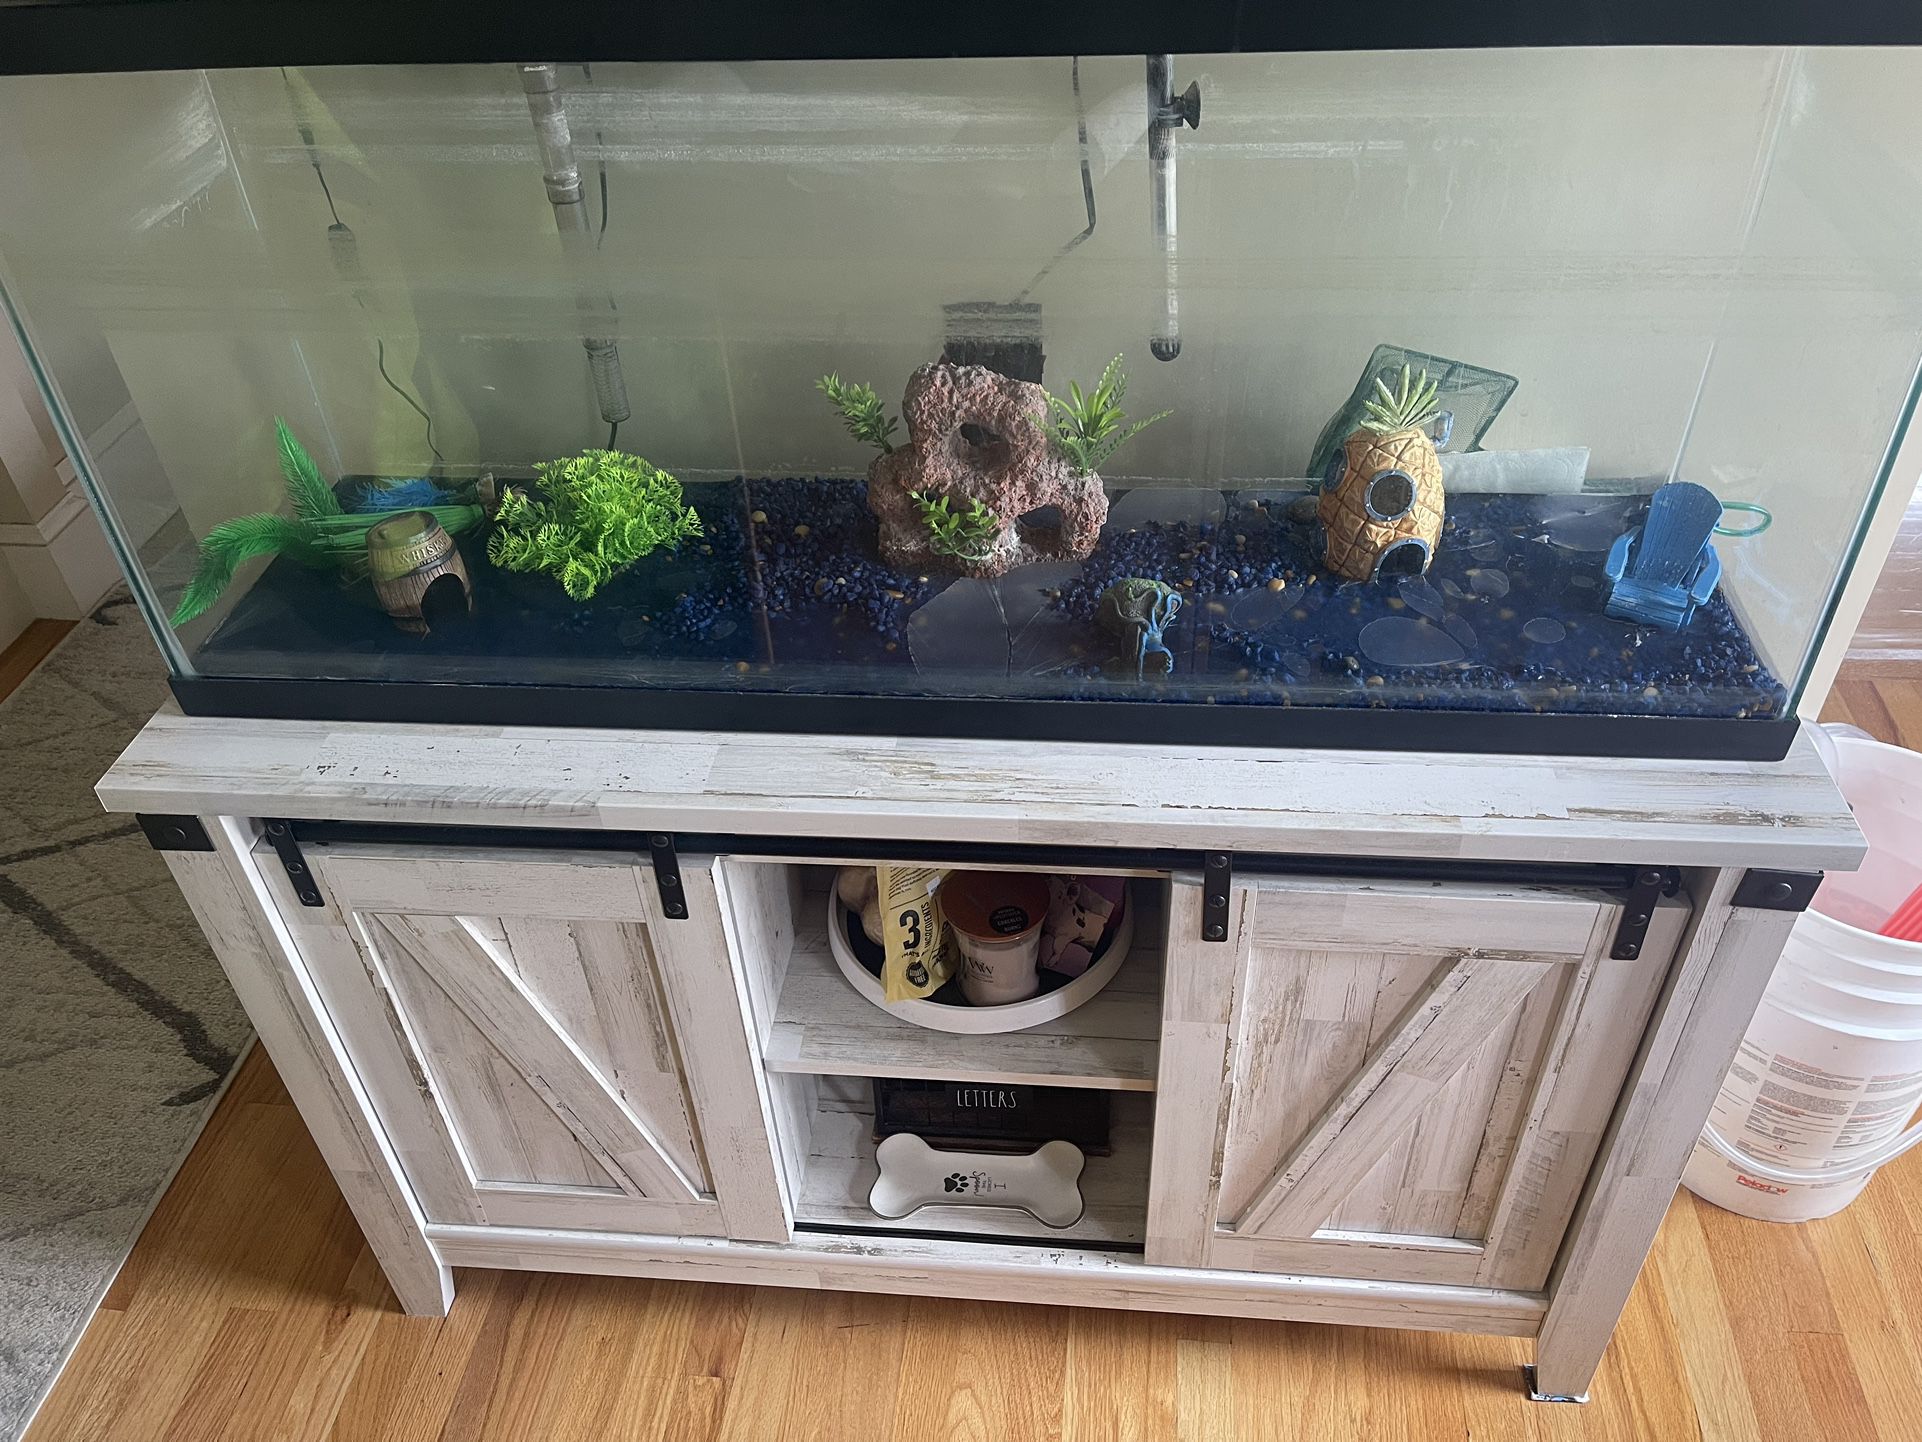 55 Gallon fish Tank and Stand ($700 Retail Value)